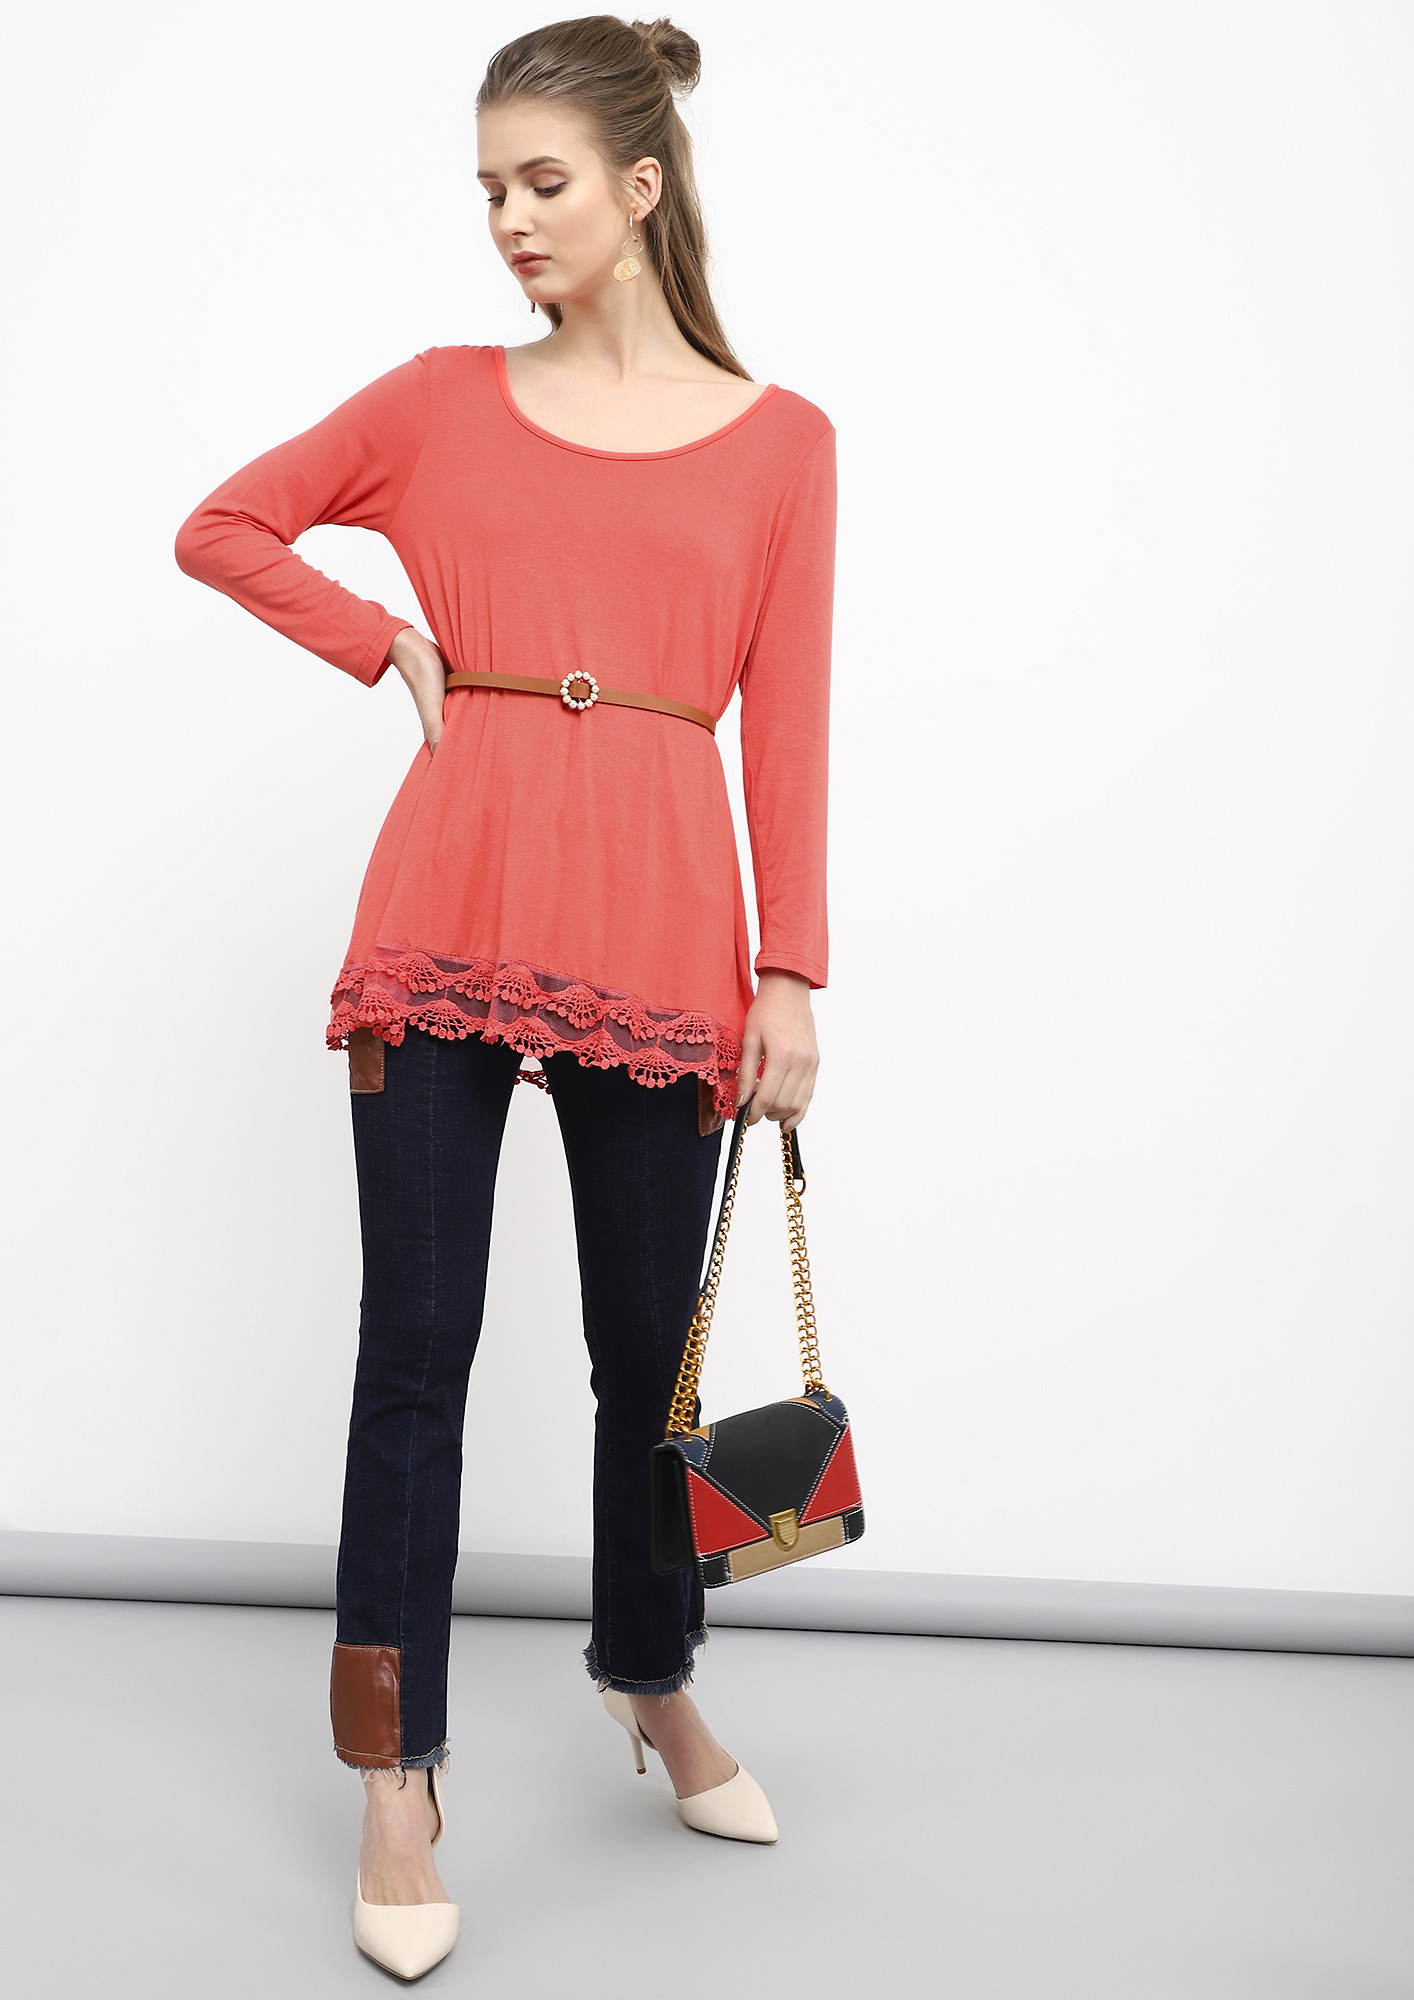 FROM AM TO PM PASTEL RED TUNIC TOP